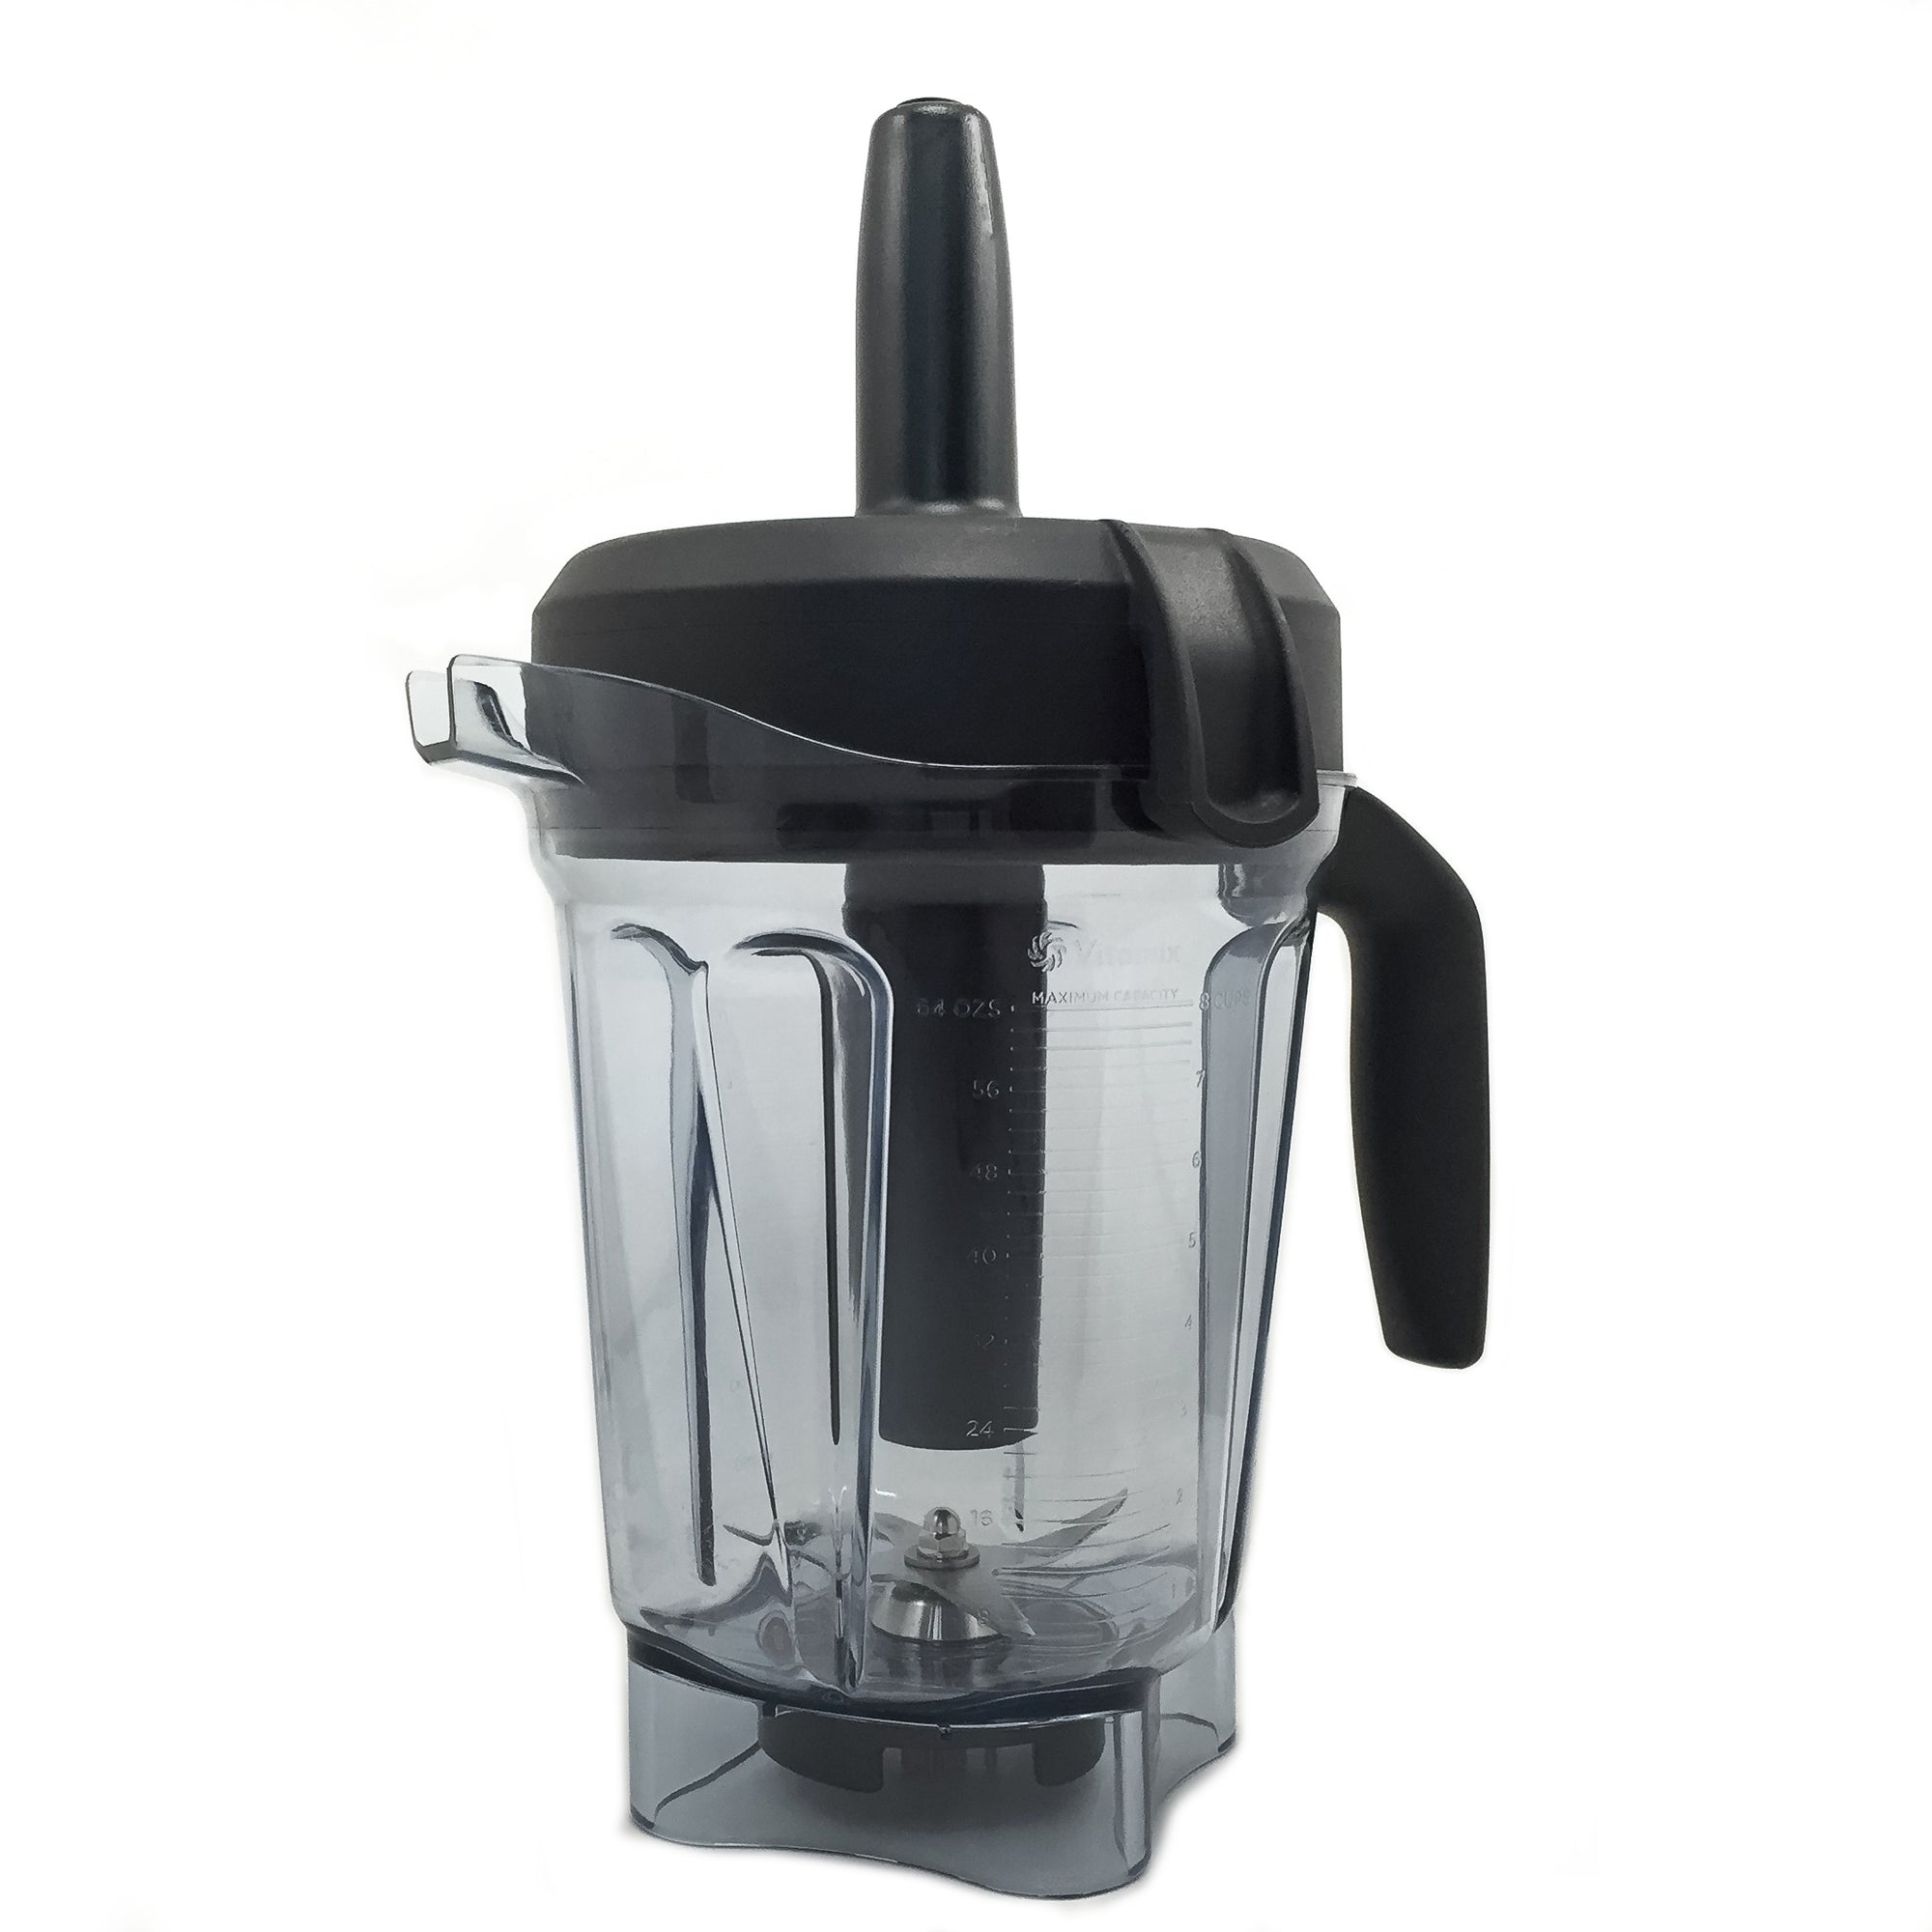 Heavy Duty Low-Profile Tamper for Vitamix Blenders